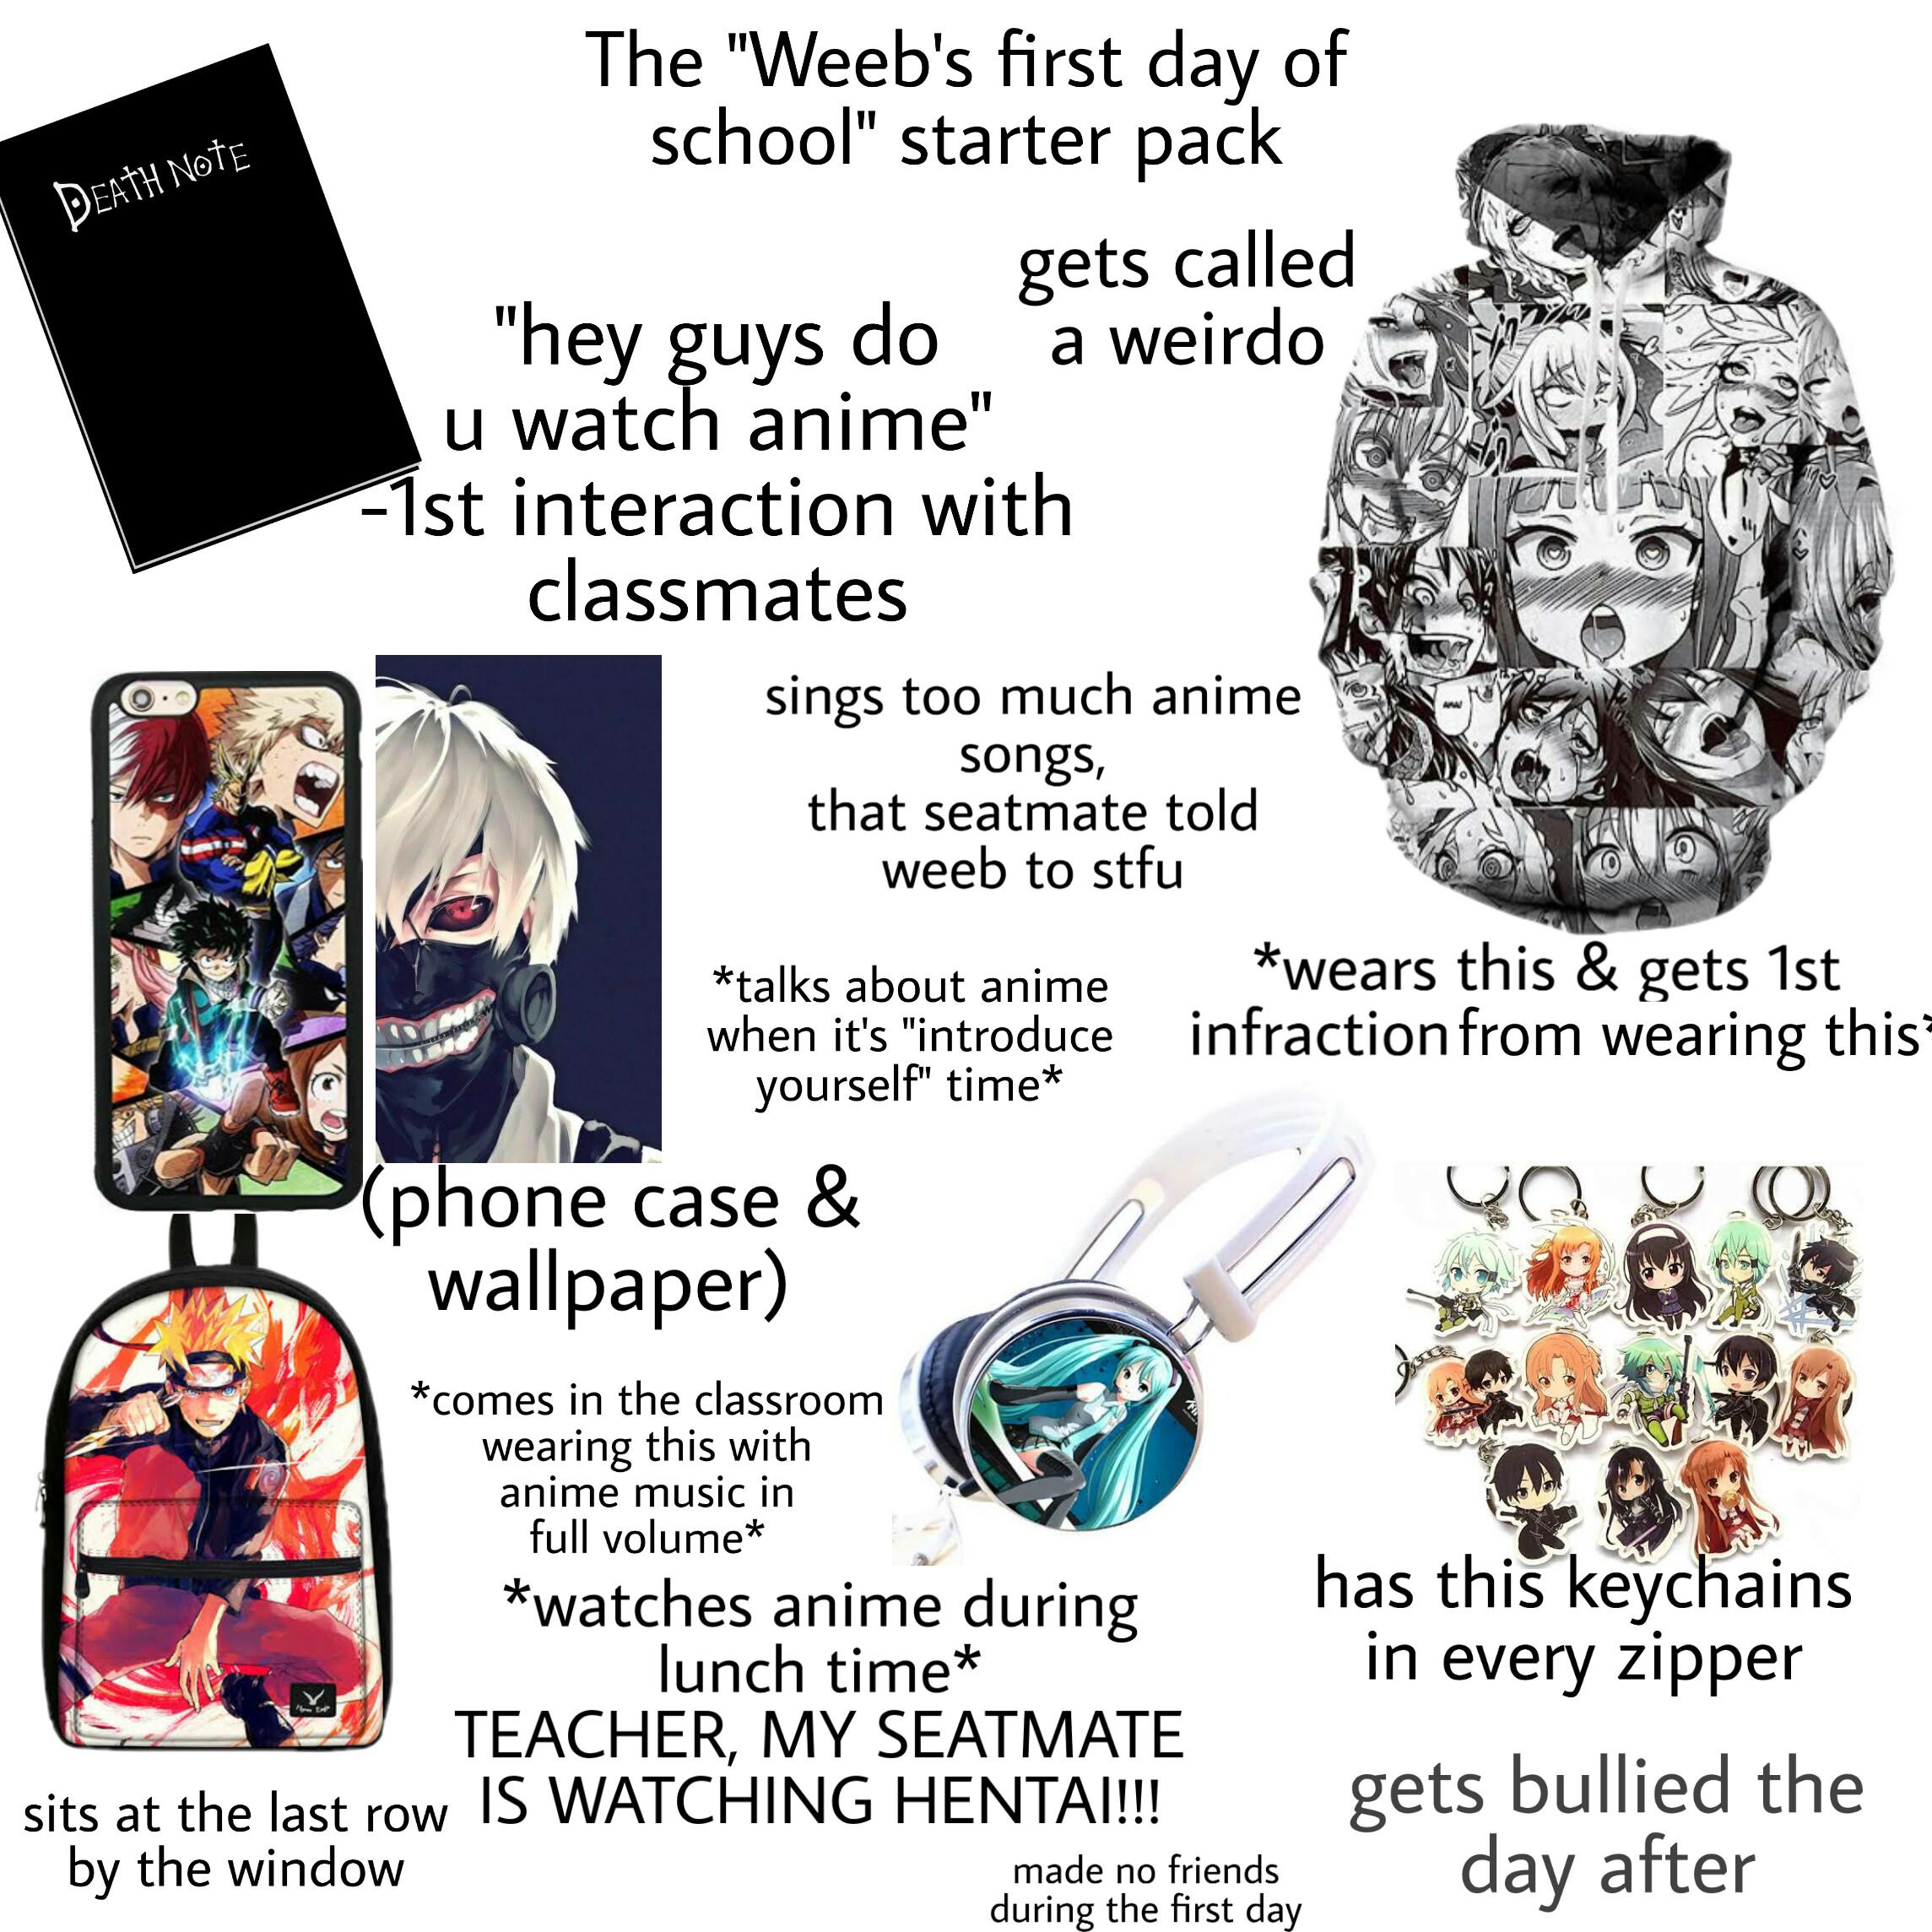 weeb starter pack memes - Death Note The "Weeb's first day of school" starter pack gets called "hey guys do a weirdo u watch anime" 1st interaction with classmates sings too much anime songs, that seatmate told weeb to stfu talks about anime wears this & 